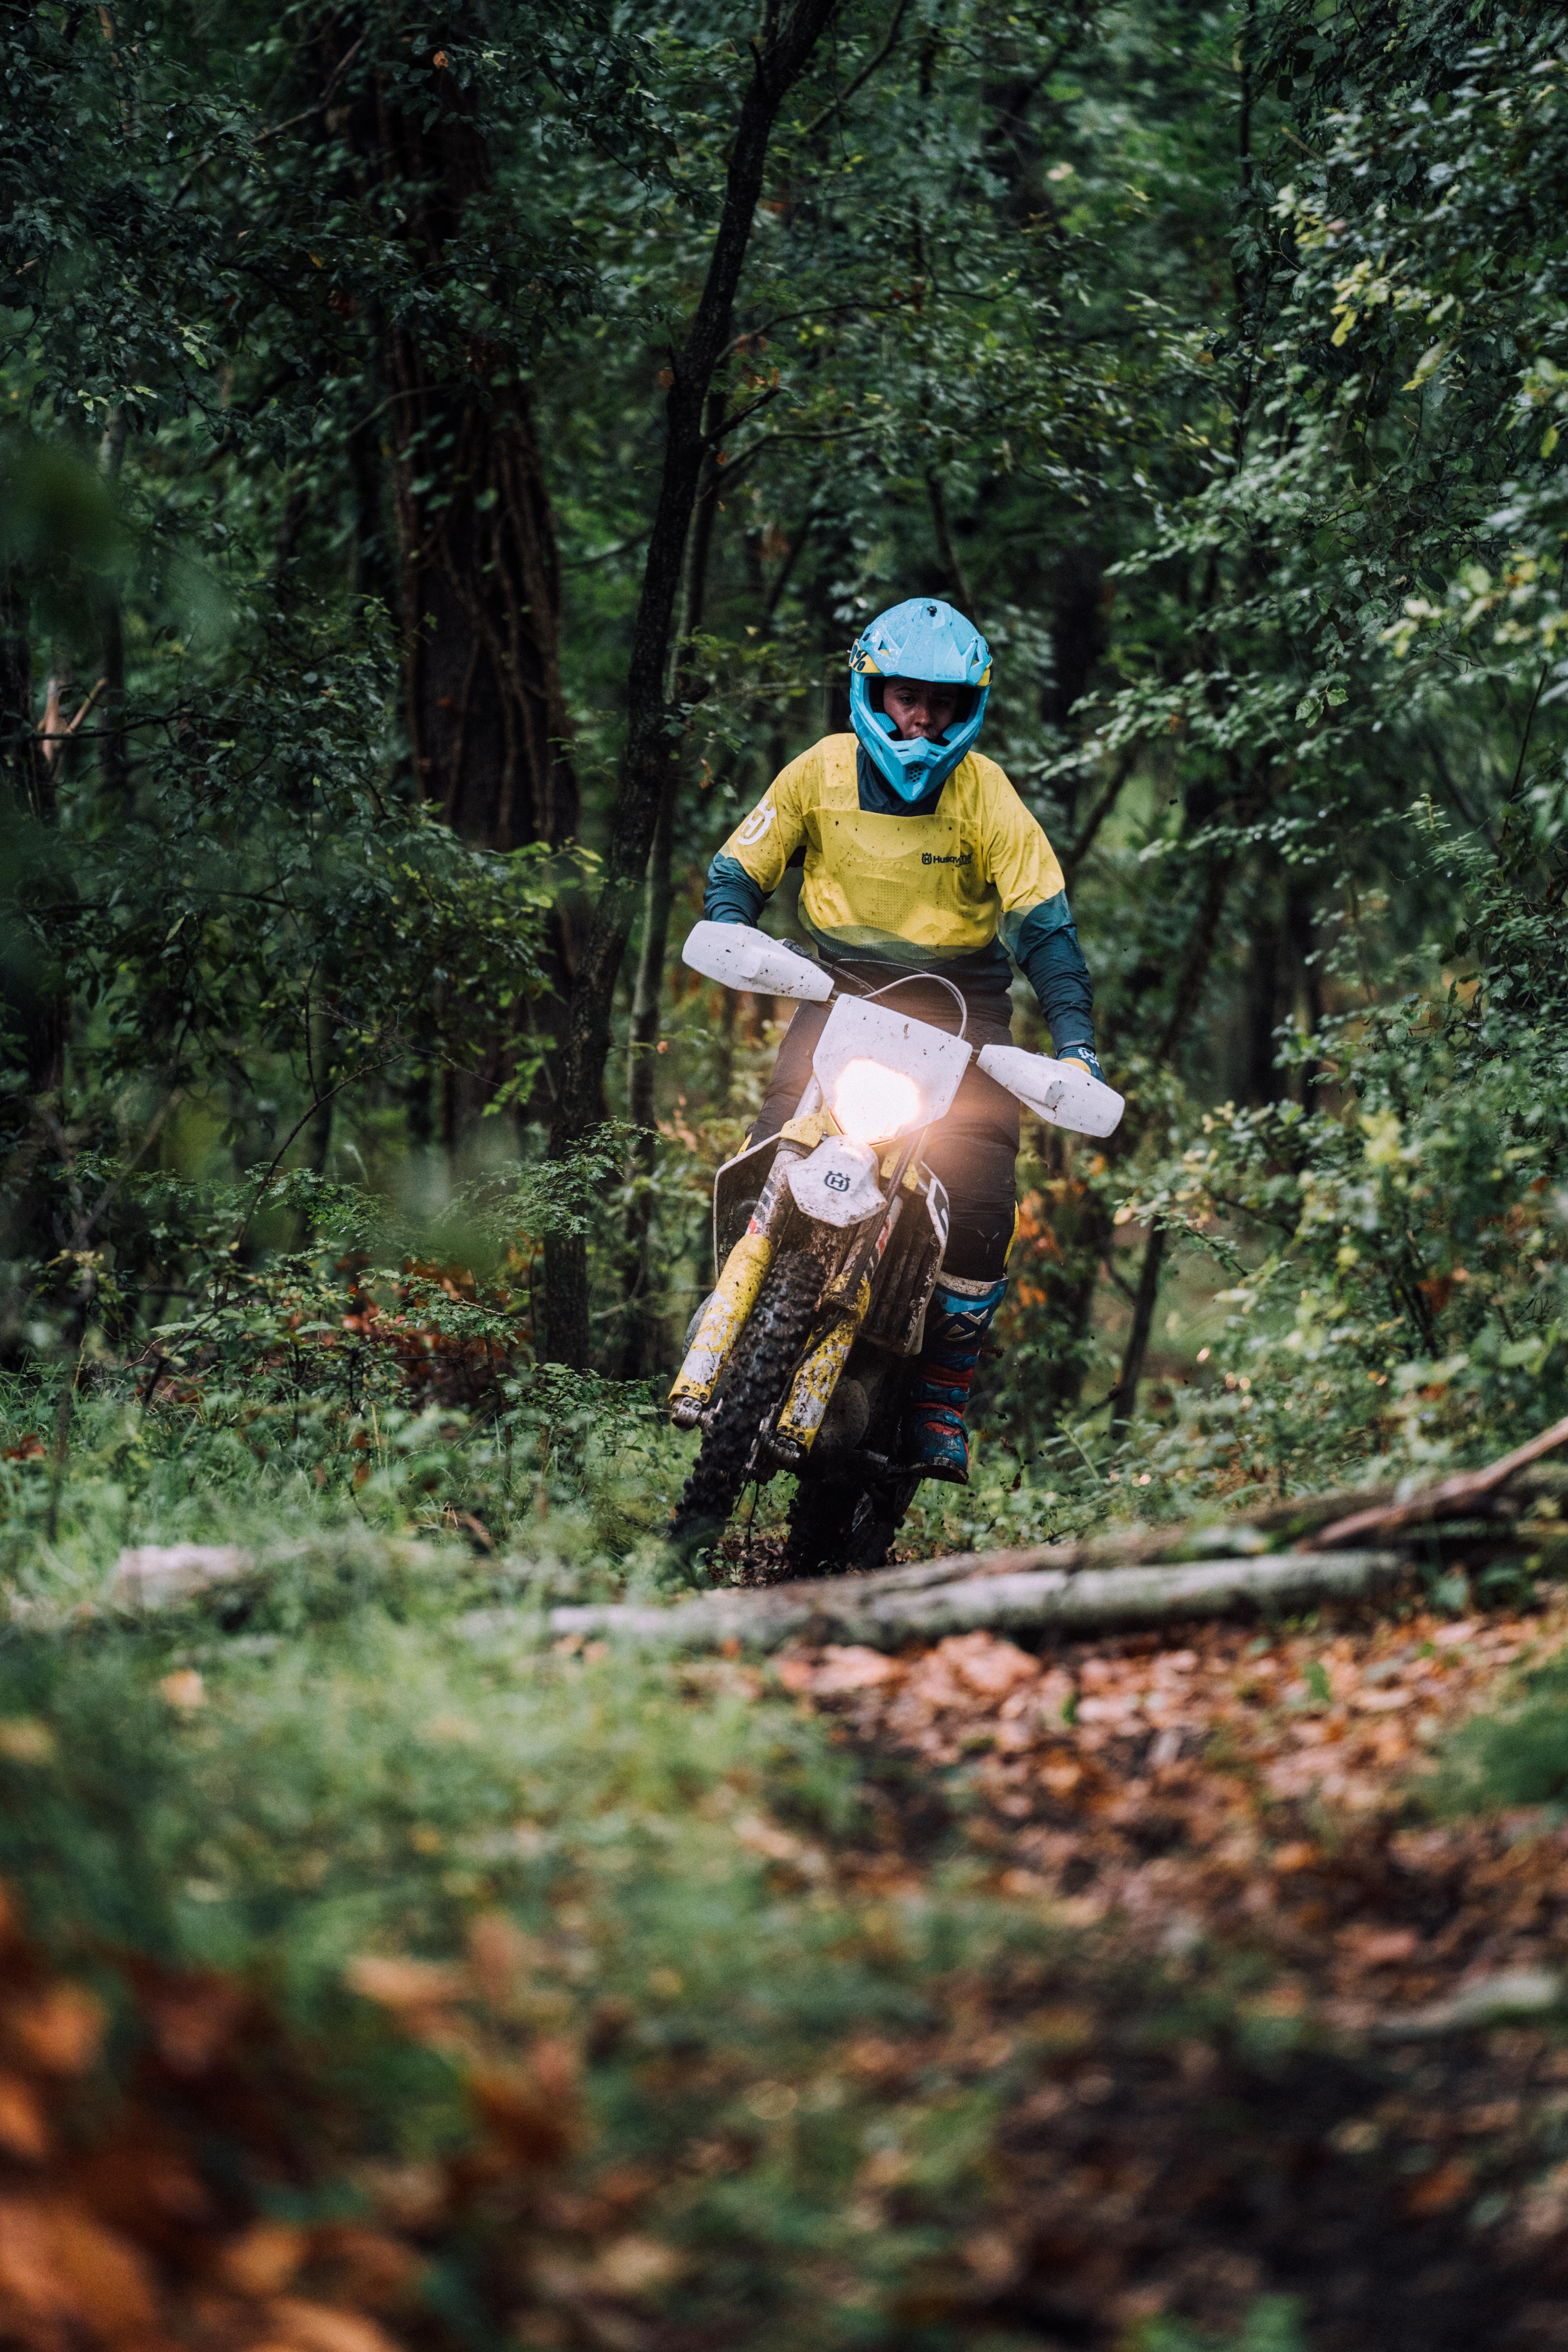 motorcyclist, bike, motorcycles, forest, traffic, movement, helmet, motorcycle